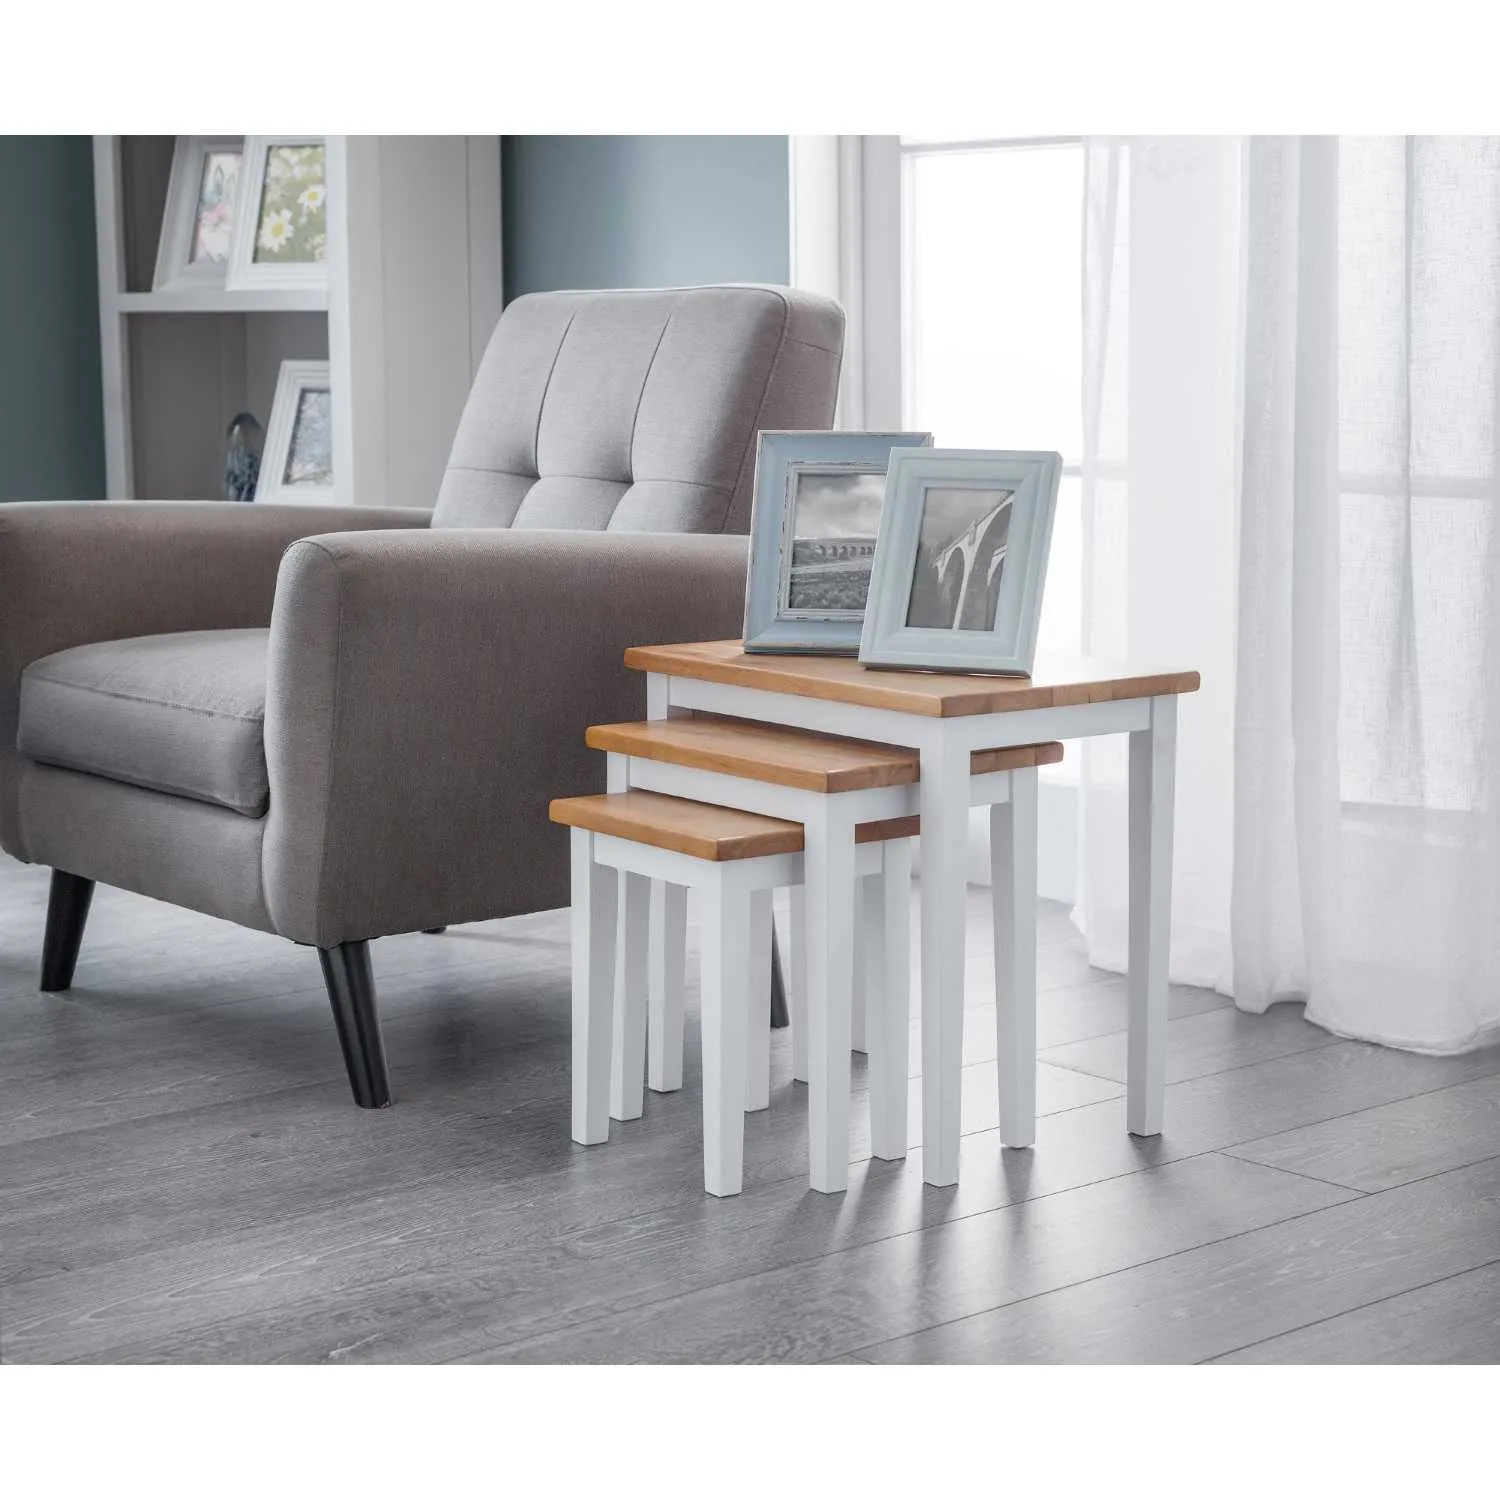 Cleo Nest Of Tables White Natural Oak